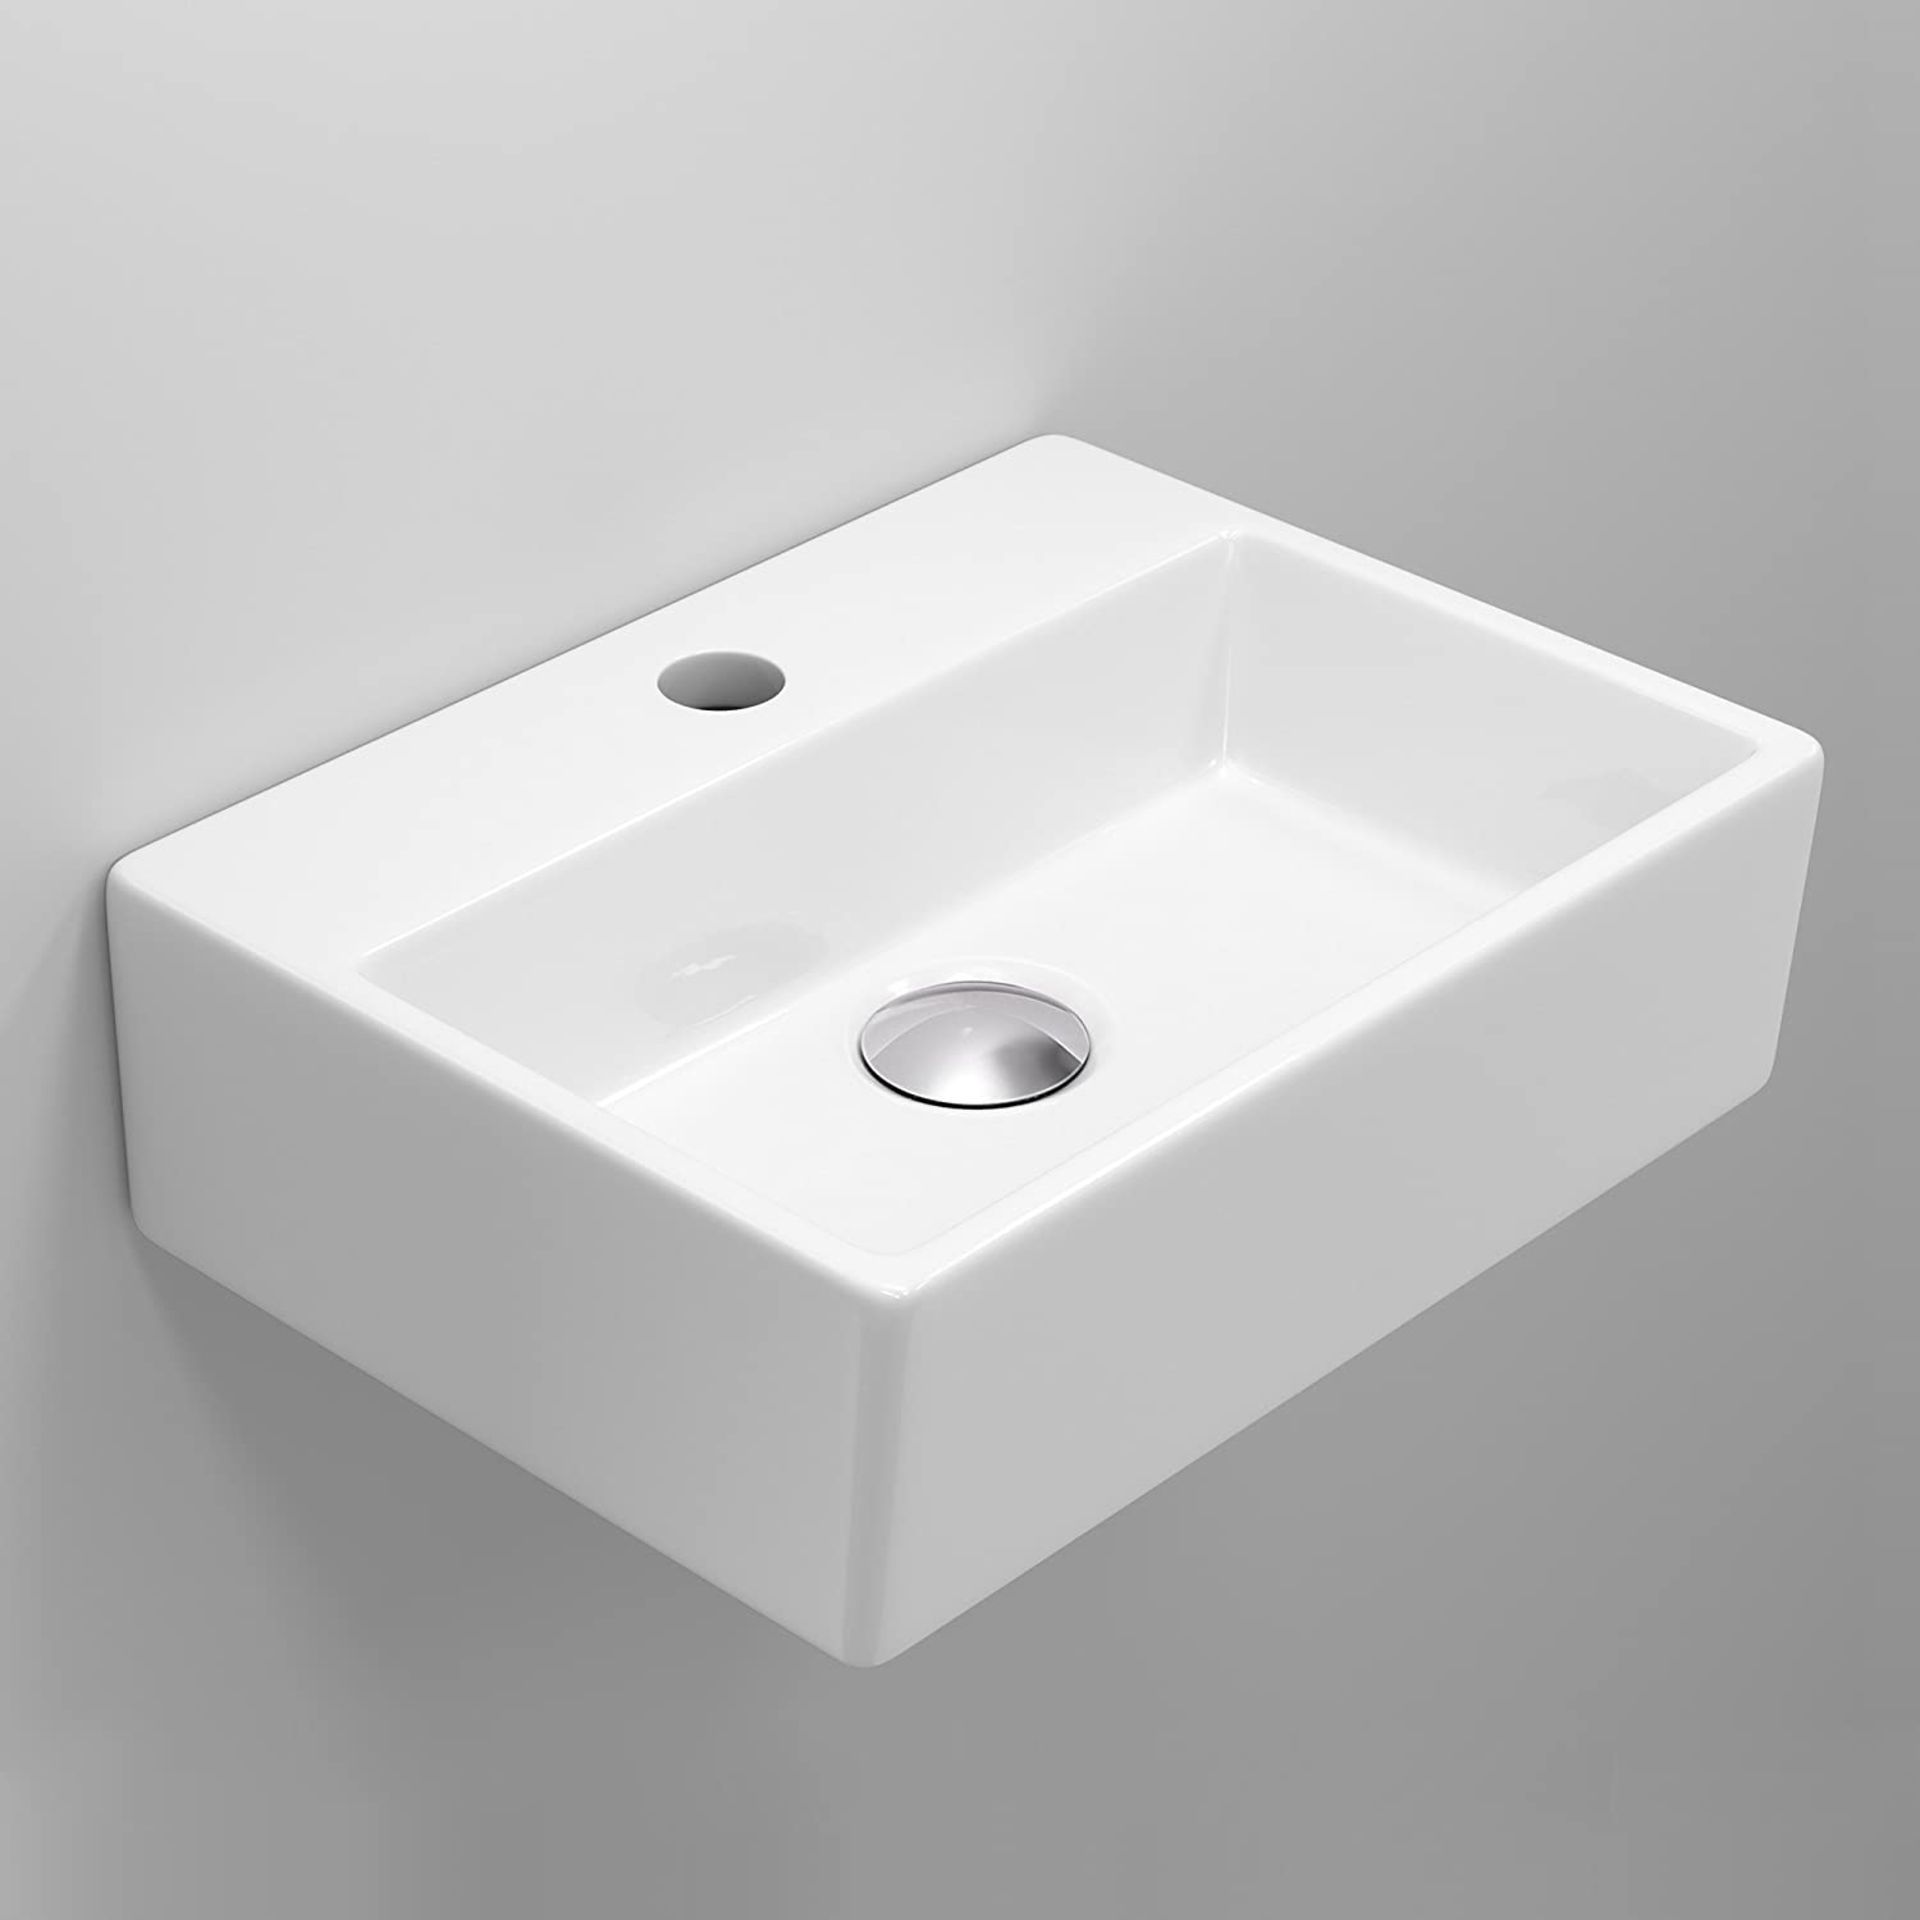 NEW (NS84) Modern Square Ceramic Cloakroom Basin White Wall Hung Bathroom Sink. Made from Whit... - Image 2 of 2